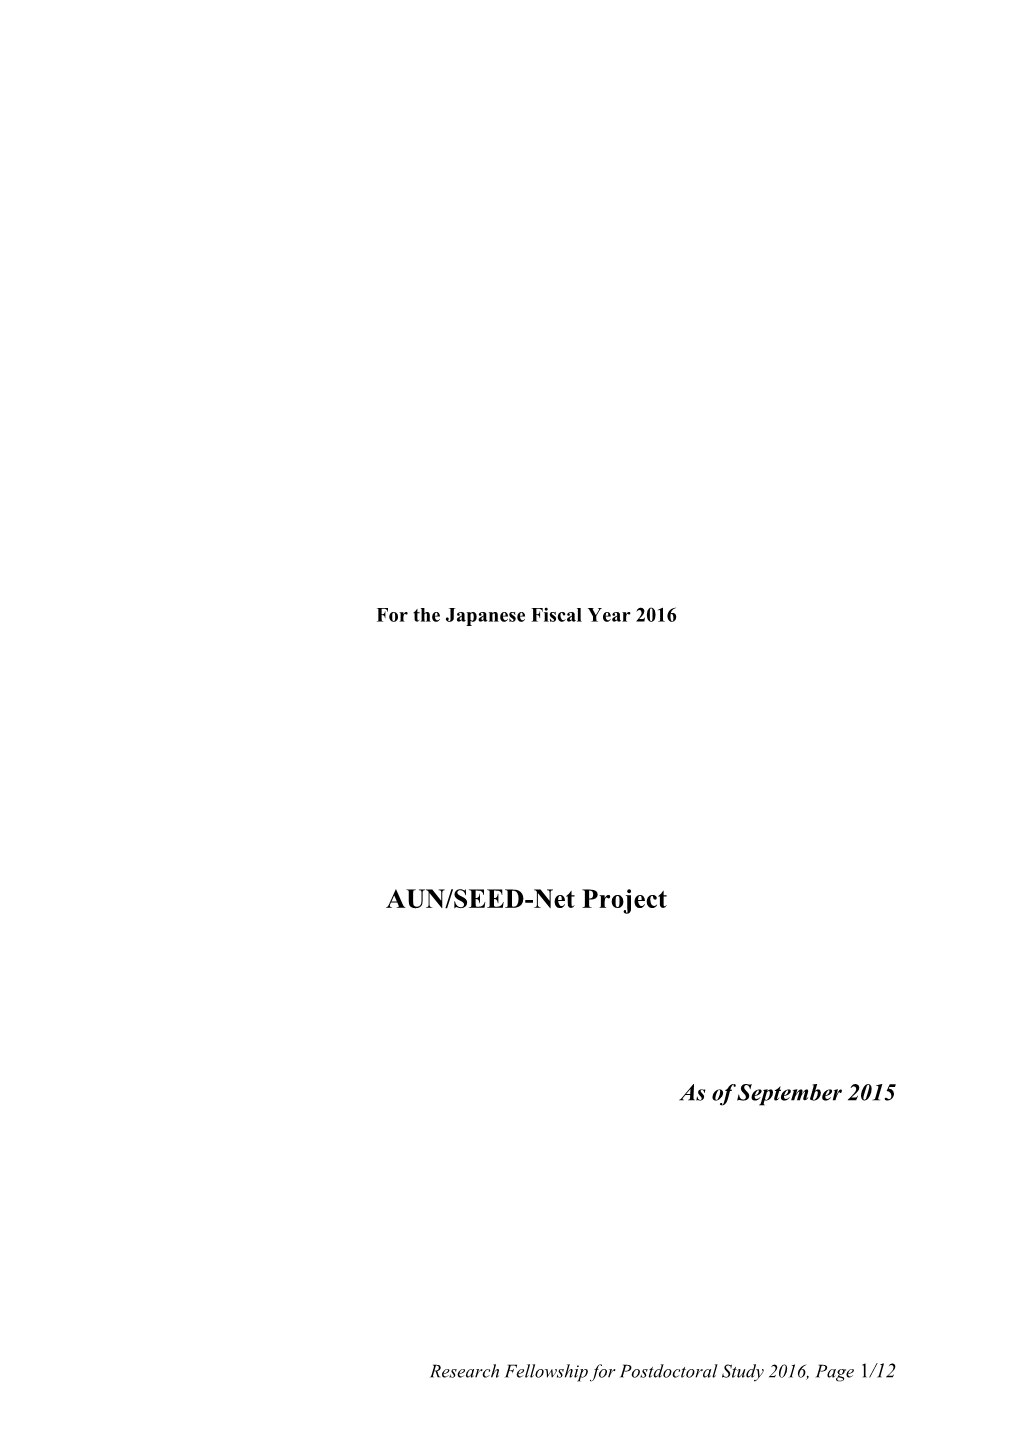 Implementation Guideline (Draft) for Research Project Support Program